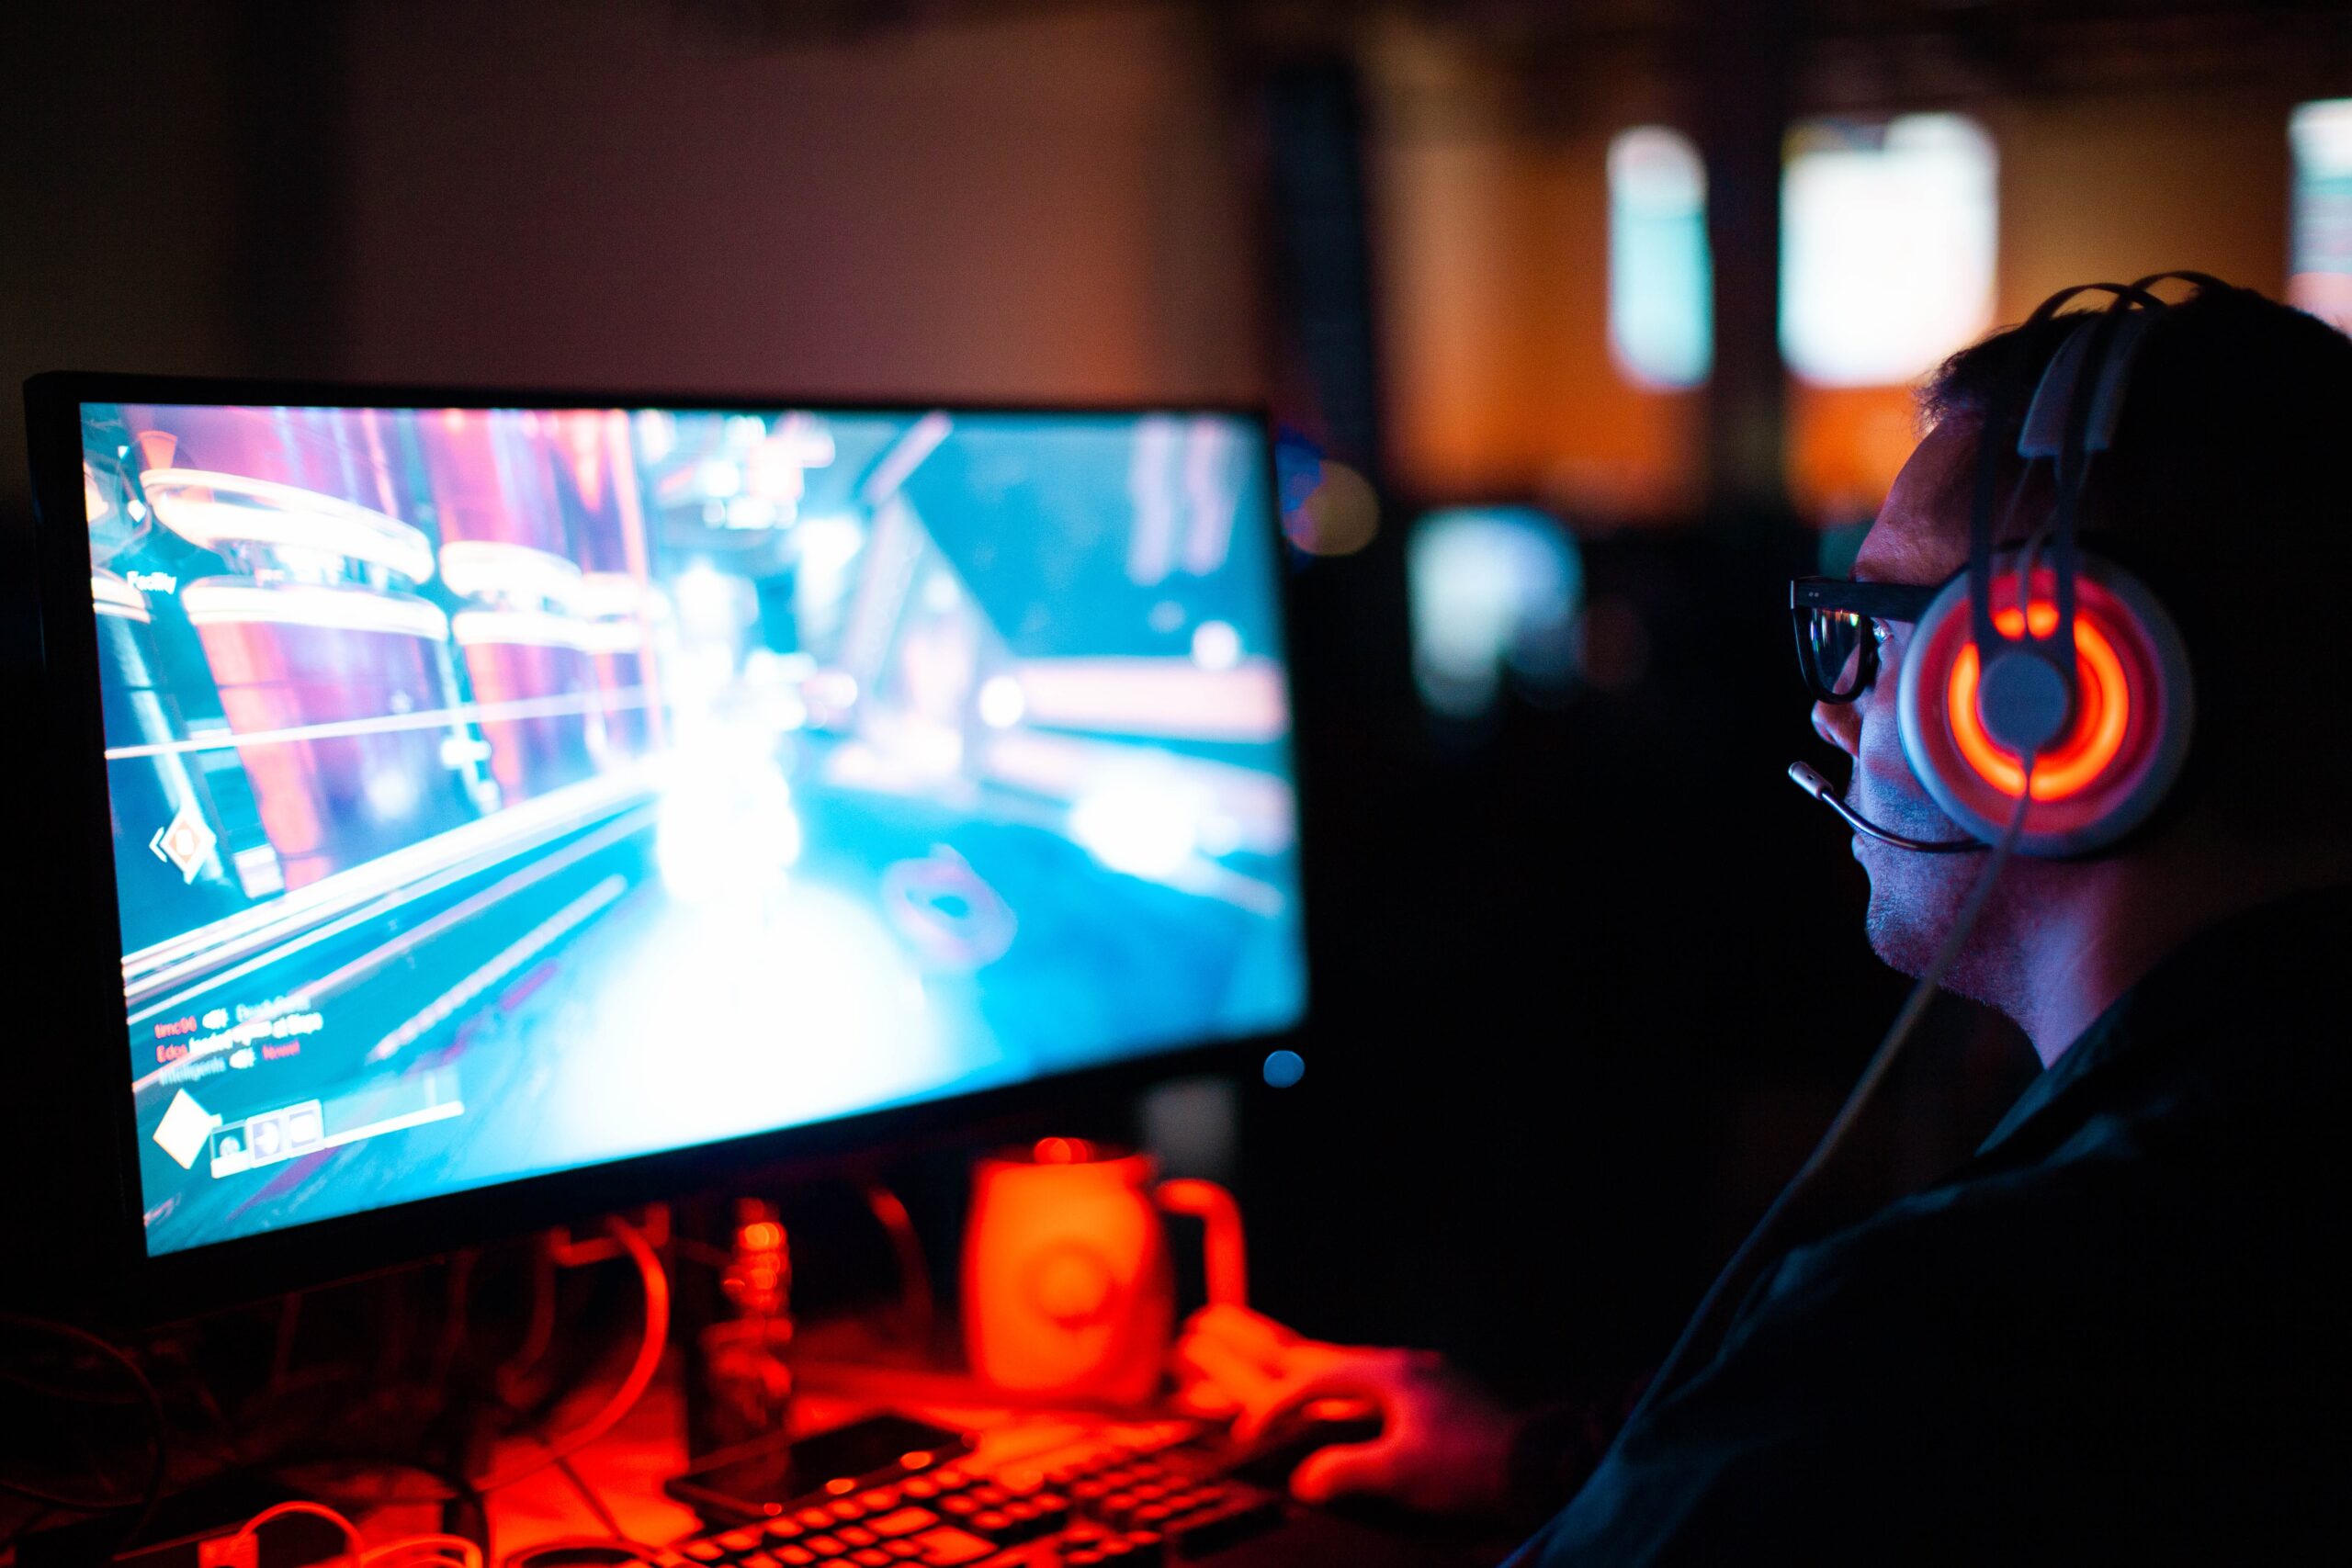 Gaming has evolved over the years, and it is now considered one of the most lucrative career paths. Professional gaming is a career that has gained a lot of popularity over the years.